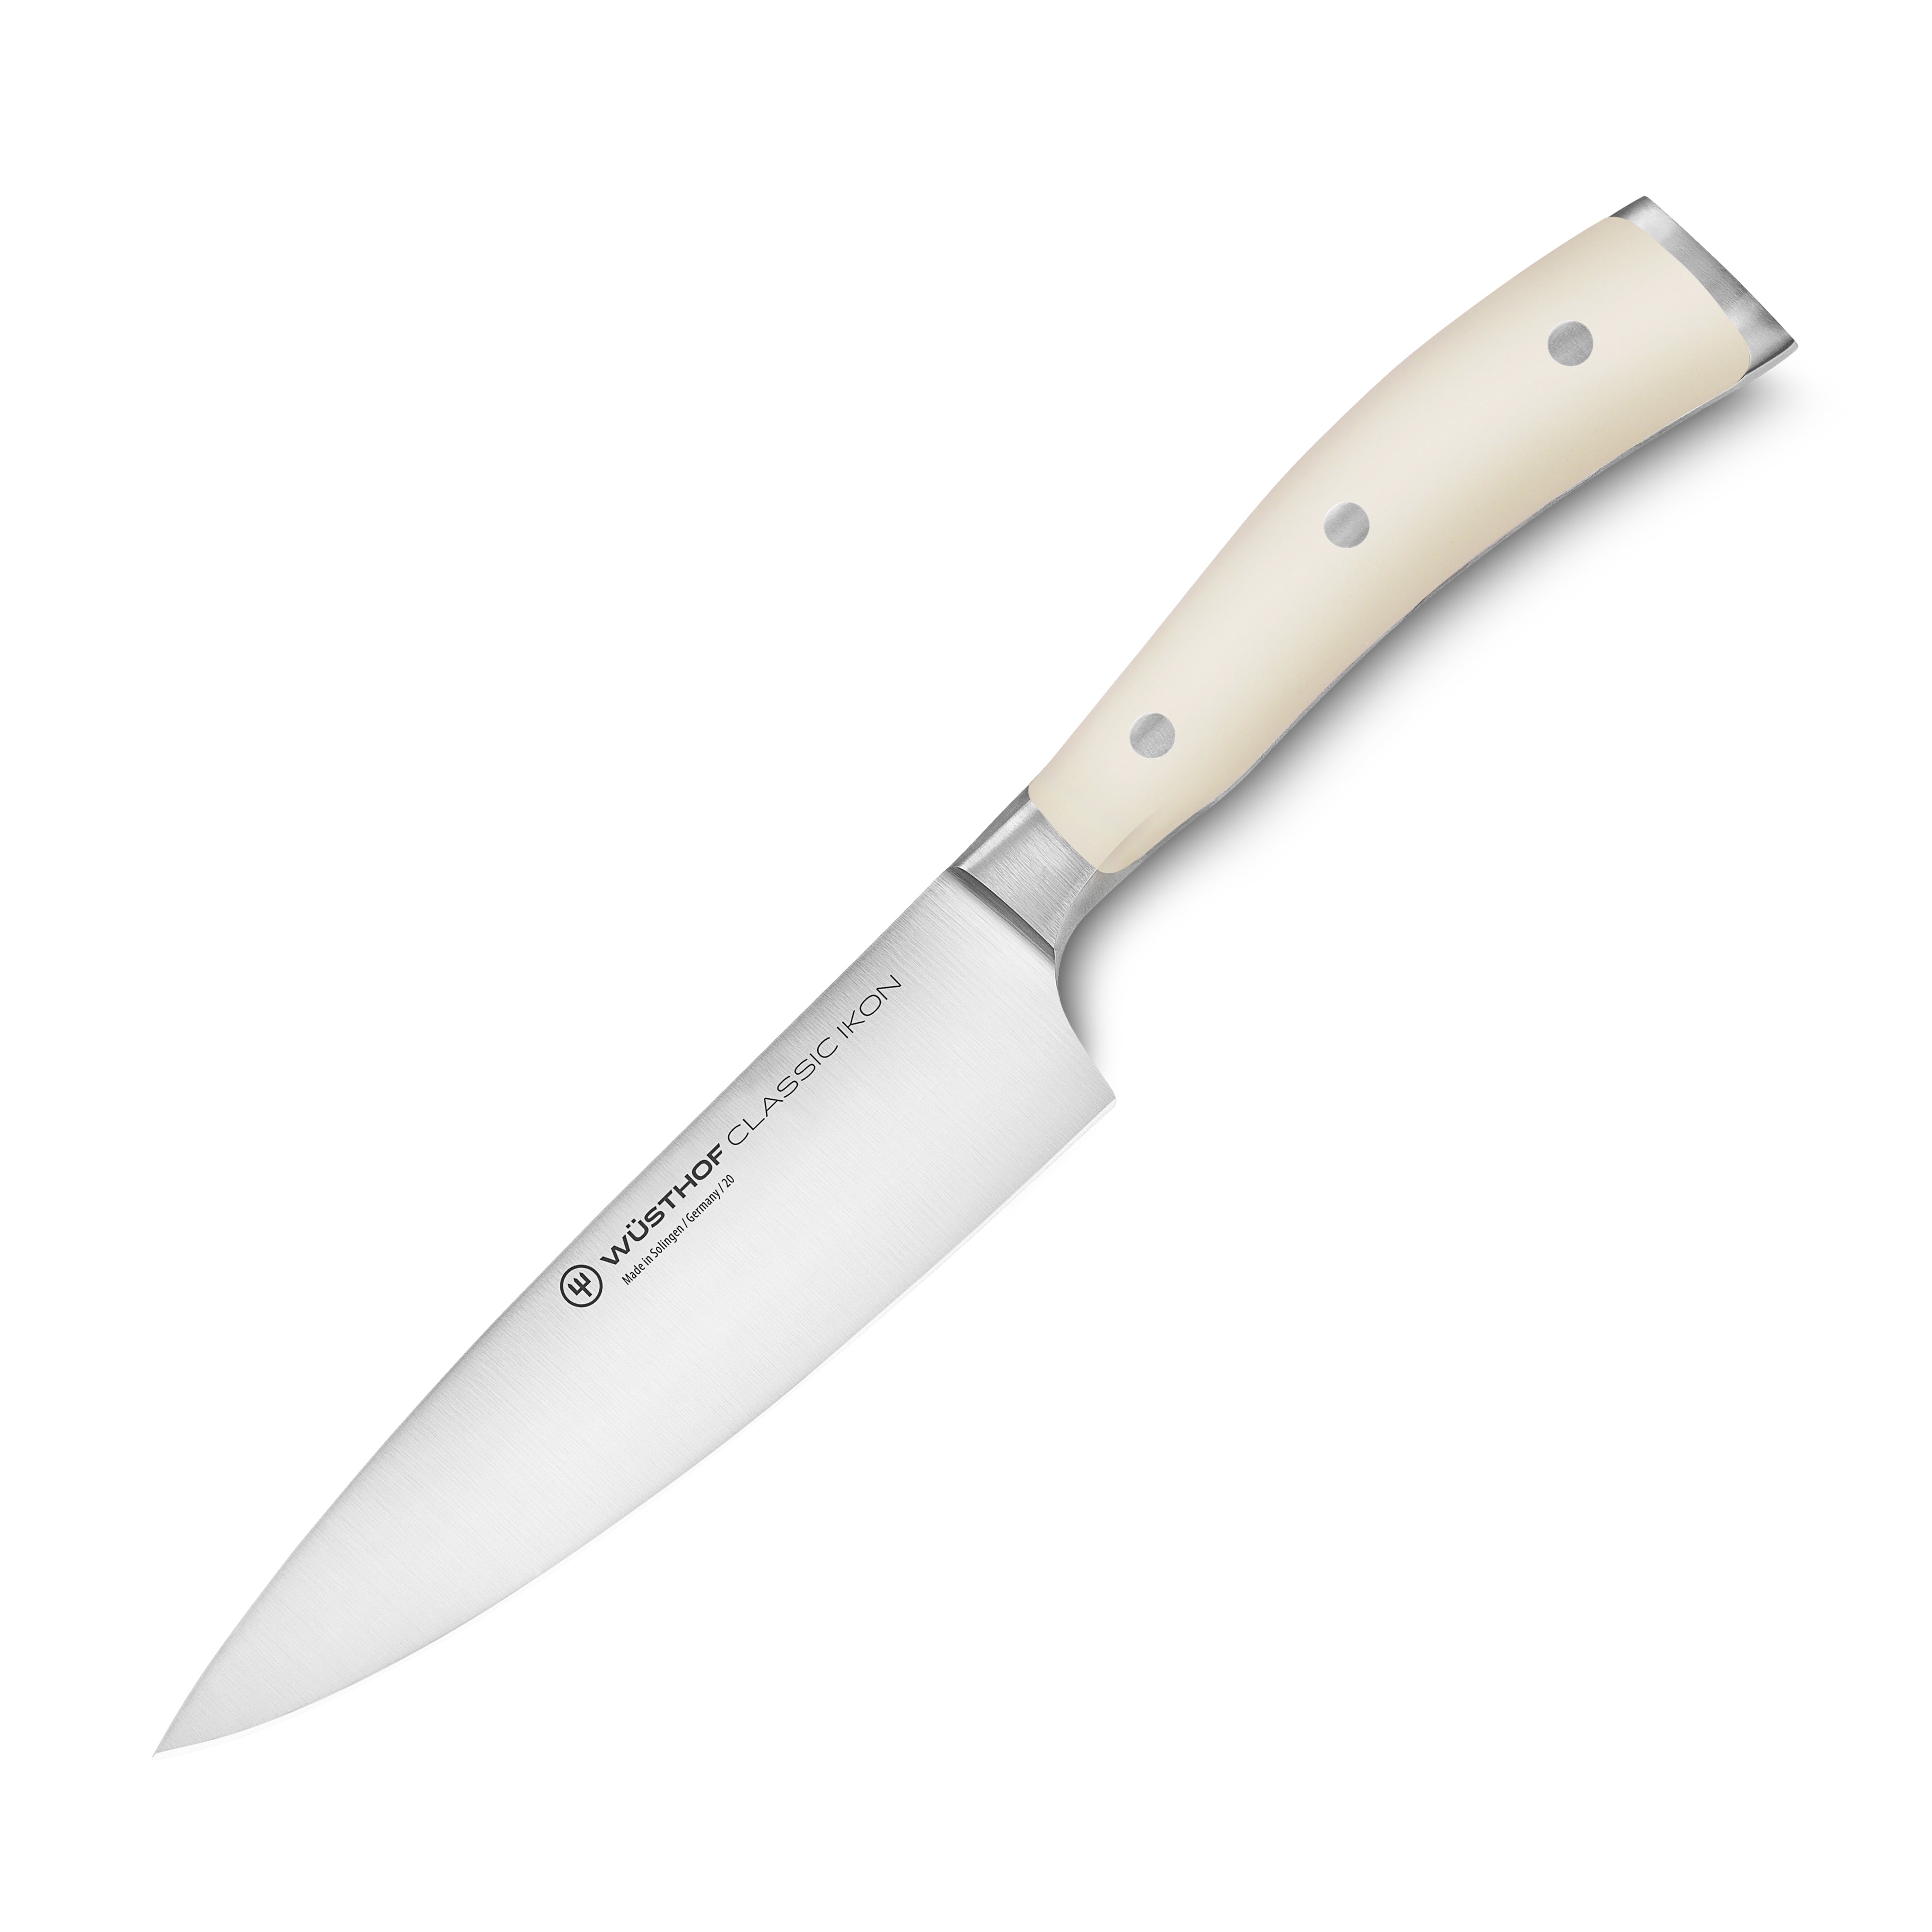 Wusthof 1040330116 Classic Ikon 6 Forged Cook's Knife with POM Handle